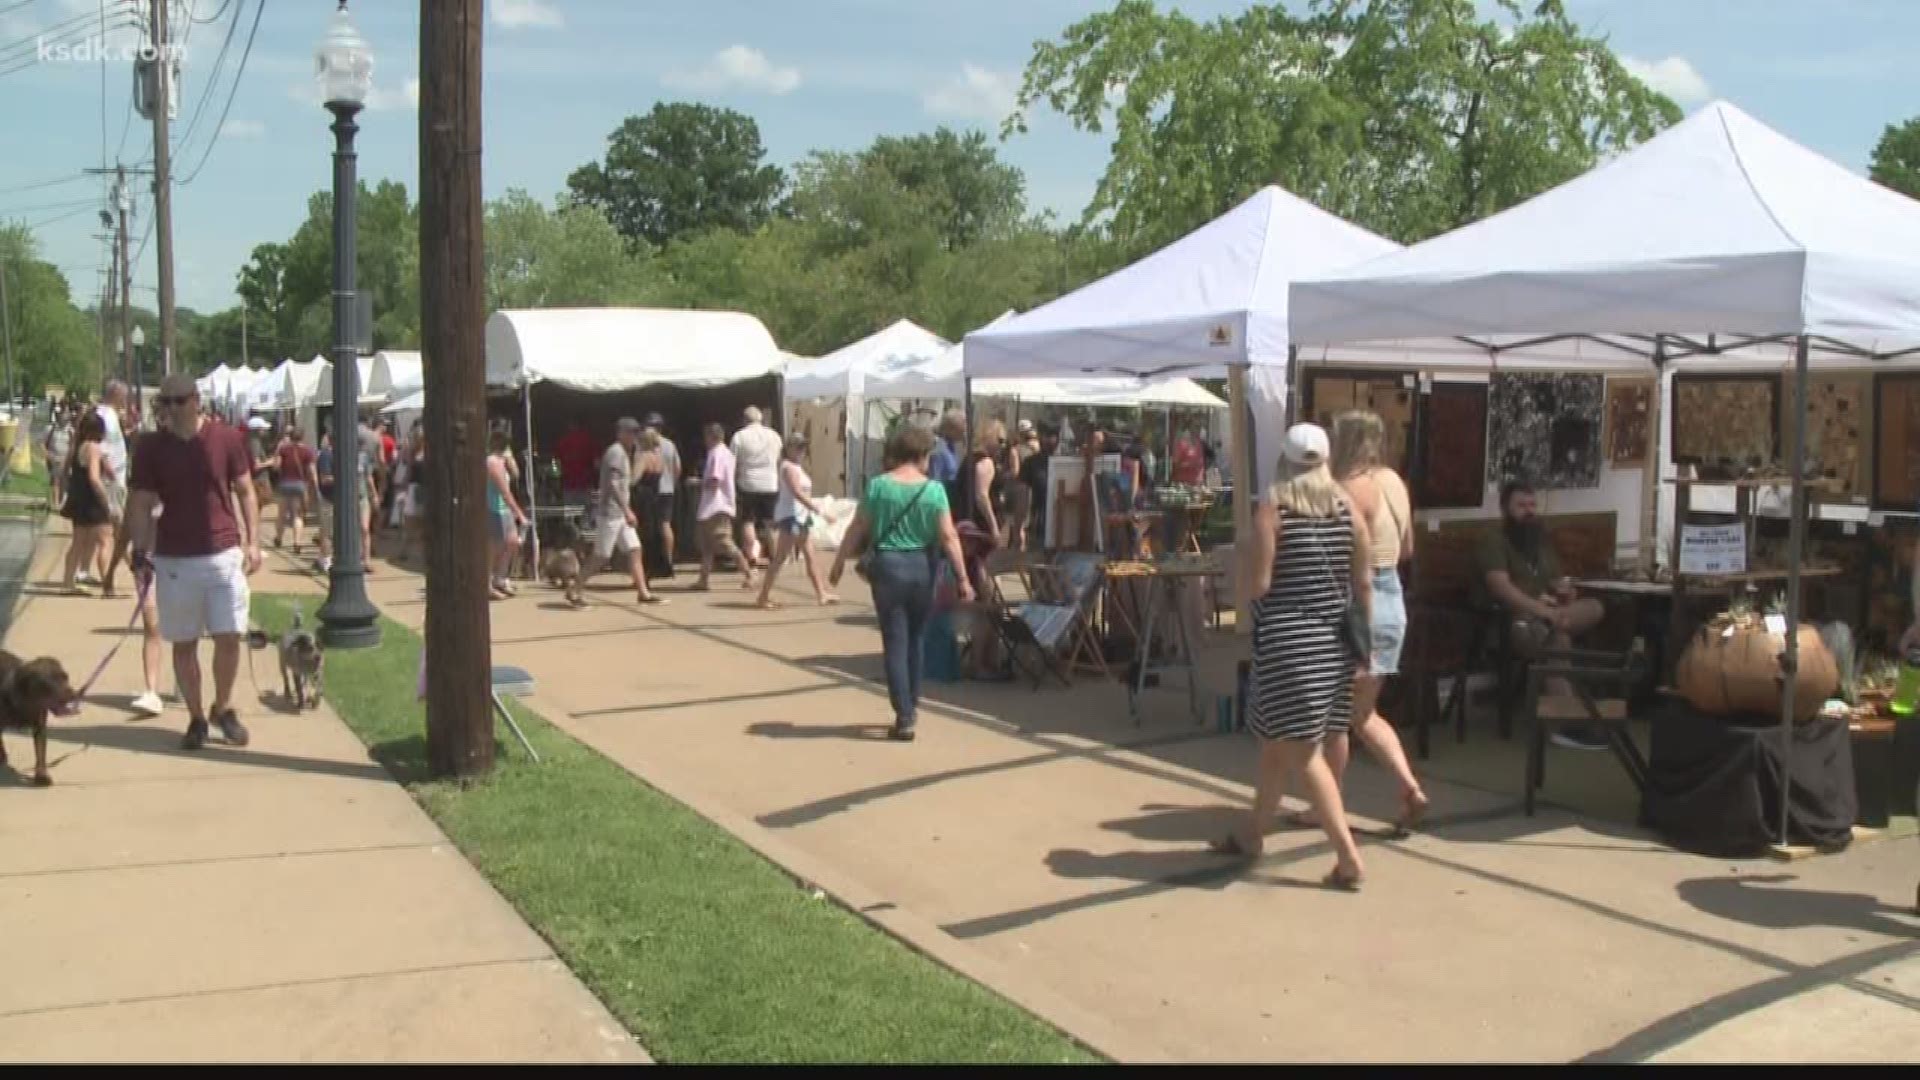 The festival goes until 10 p.m. Saturday and from 11 a.m. to 4 p.m. on Sunday.